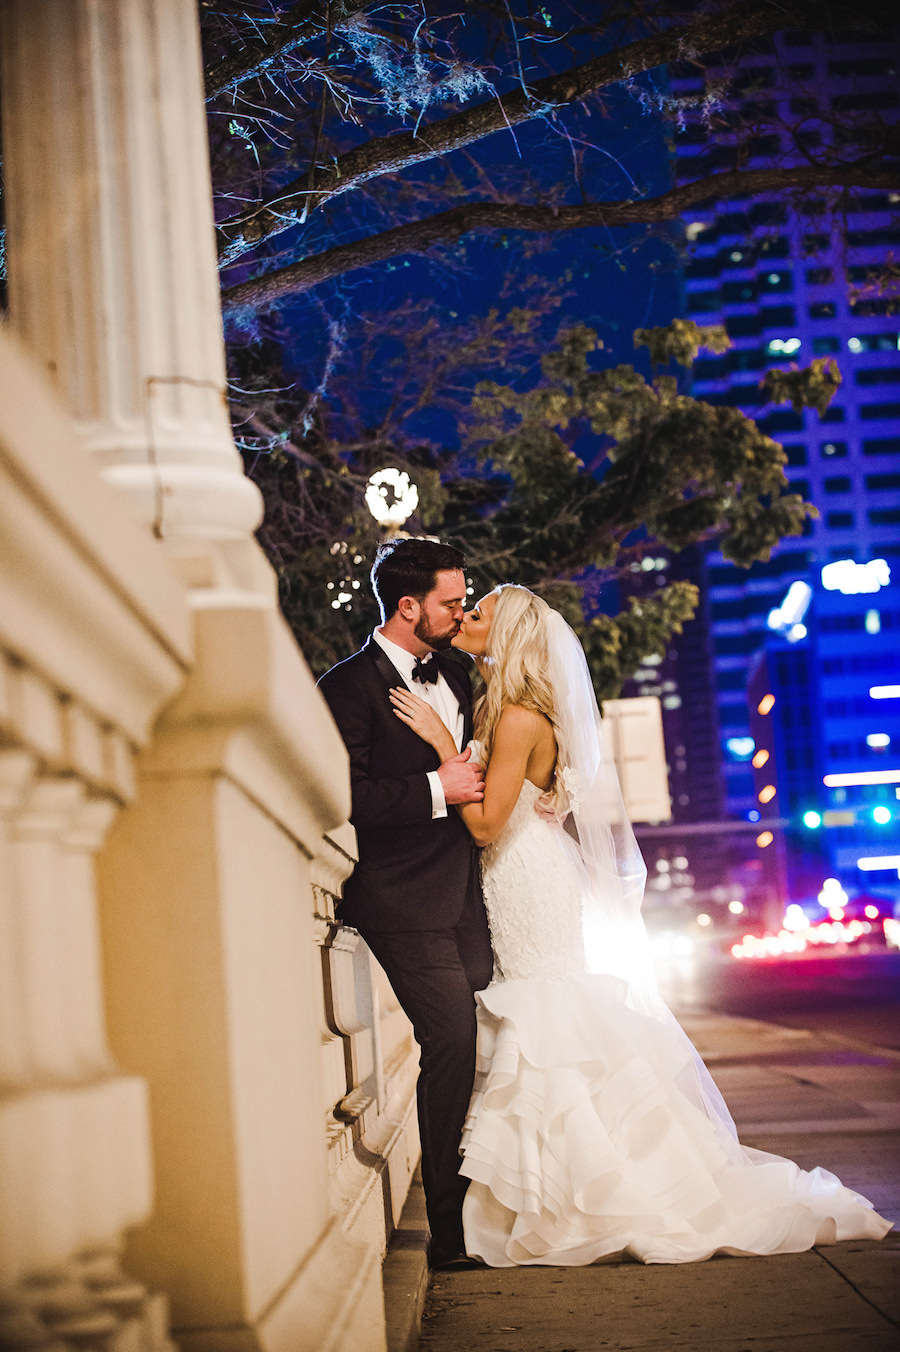 Outdoor, Downtown Tampa Bride and Groom Wedding Portrait | Tampa Wedding Photographer Marc Edwards Photographs